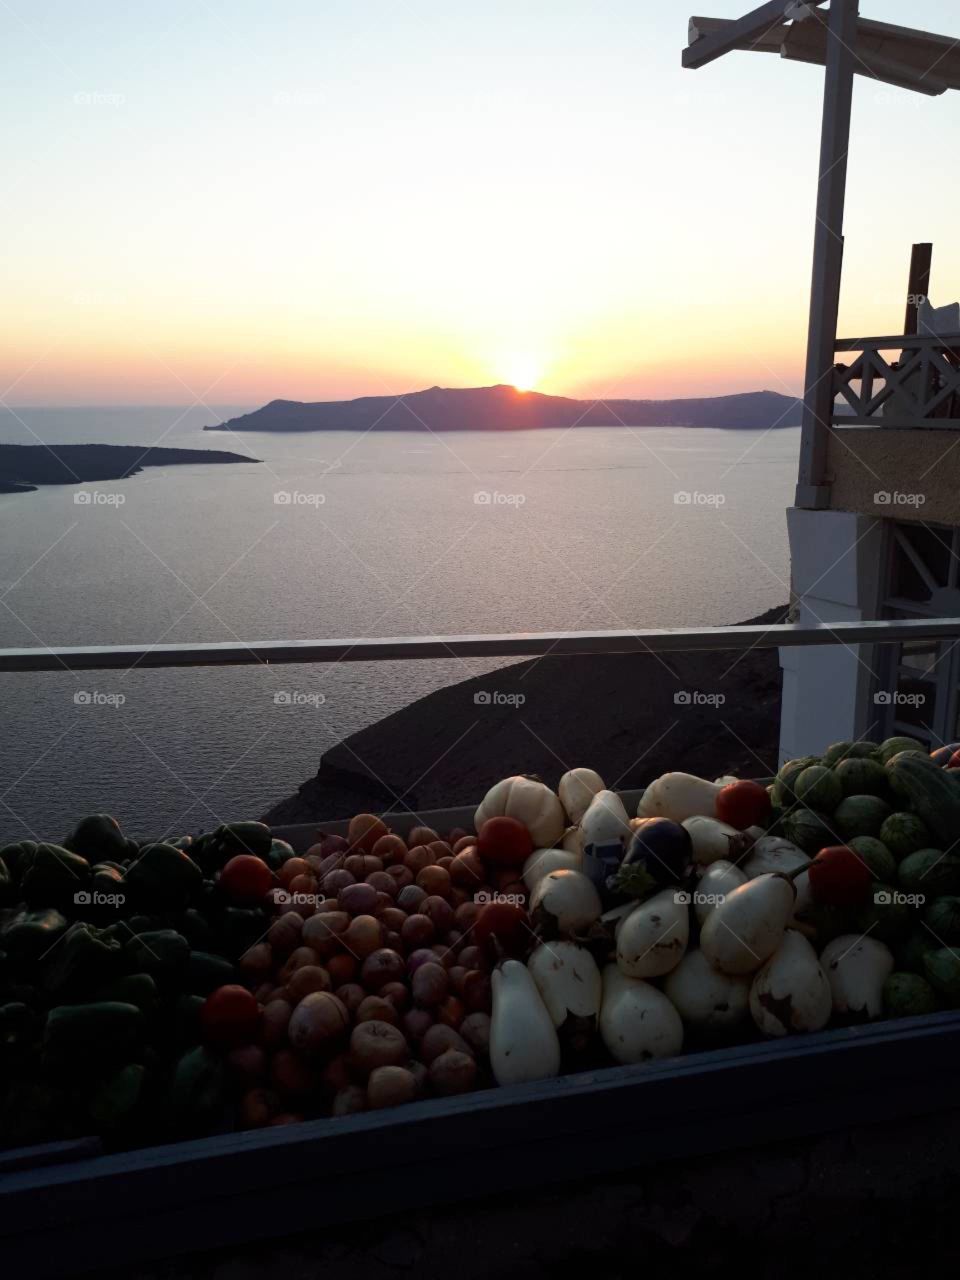 Variety of vegetables and amazing view of sunset.